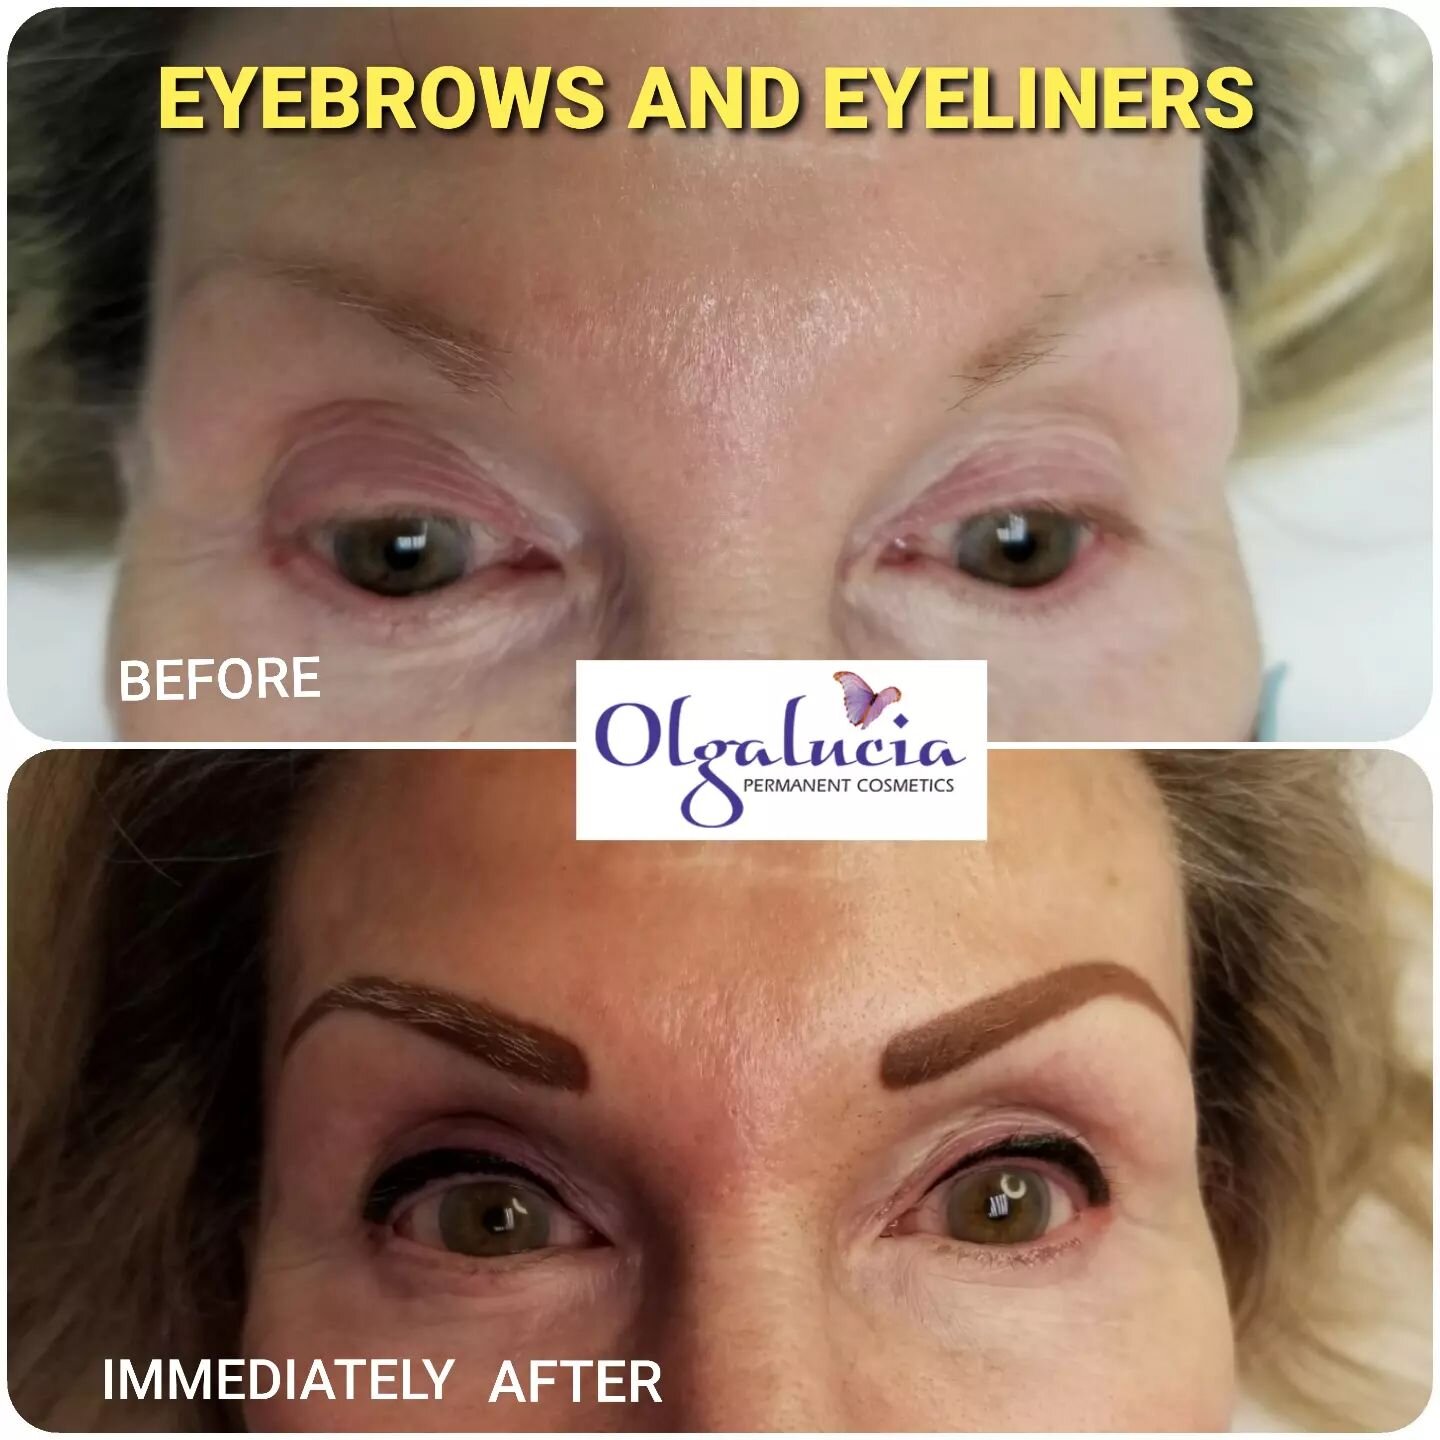 Permanent EYEBROWS and EYELINERS immediately done. Here it shows the improvement and enhancement of the eyes. After healed it will look softer and lighter.
#eyelinertattoo #eyeliner #eyebrows #permanentmakeup #permanentcosmetics #permanenteyebrows #y